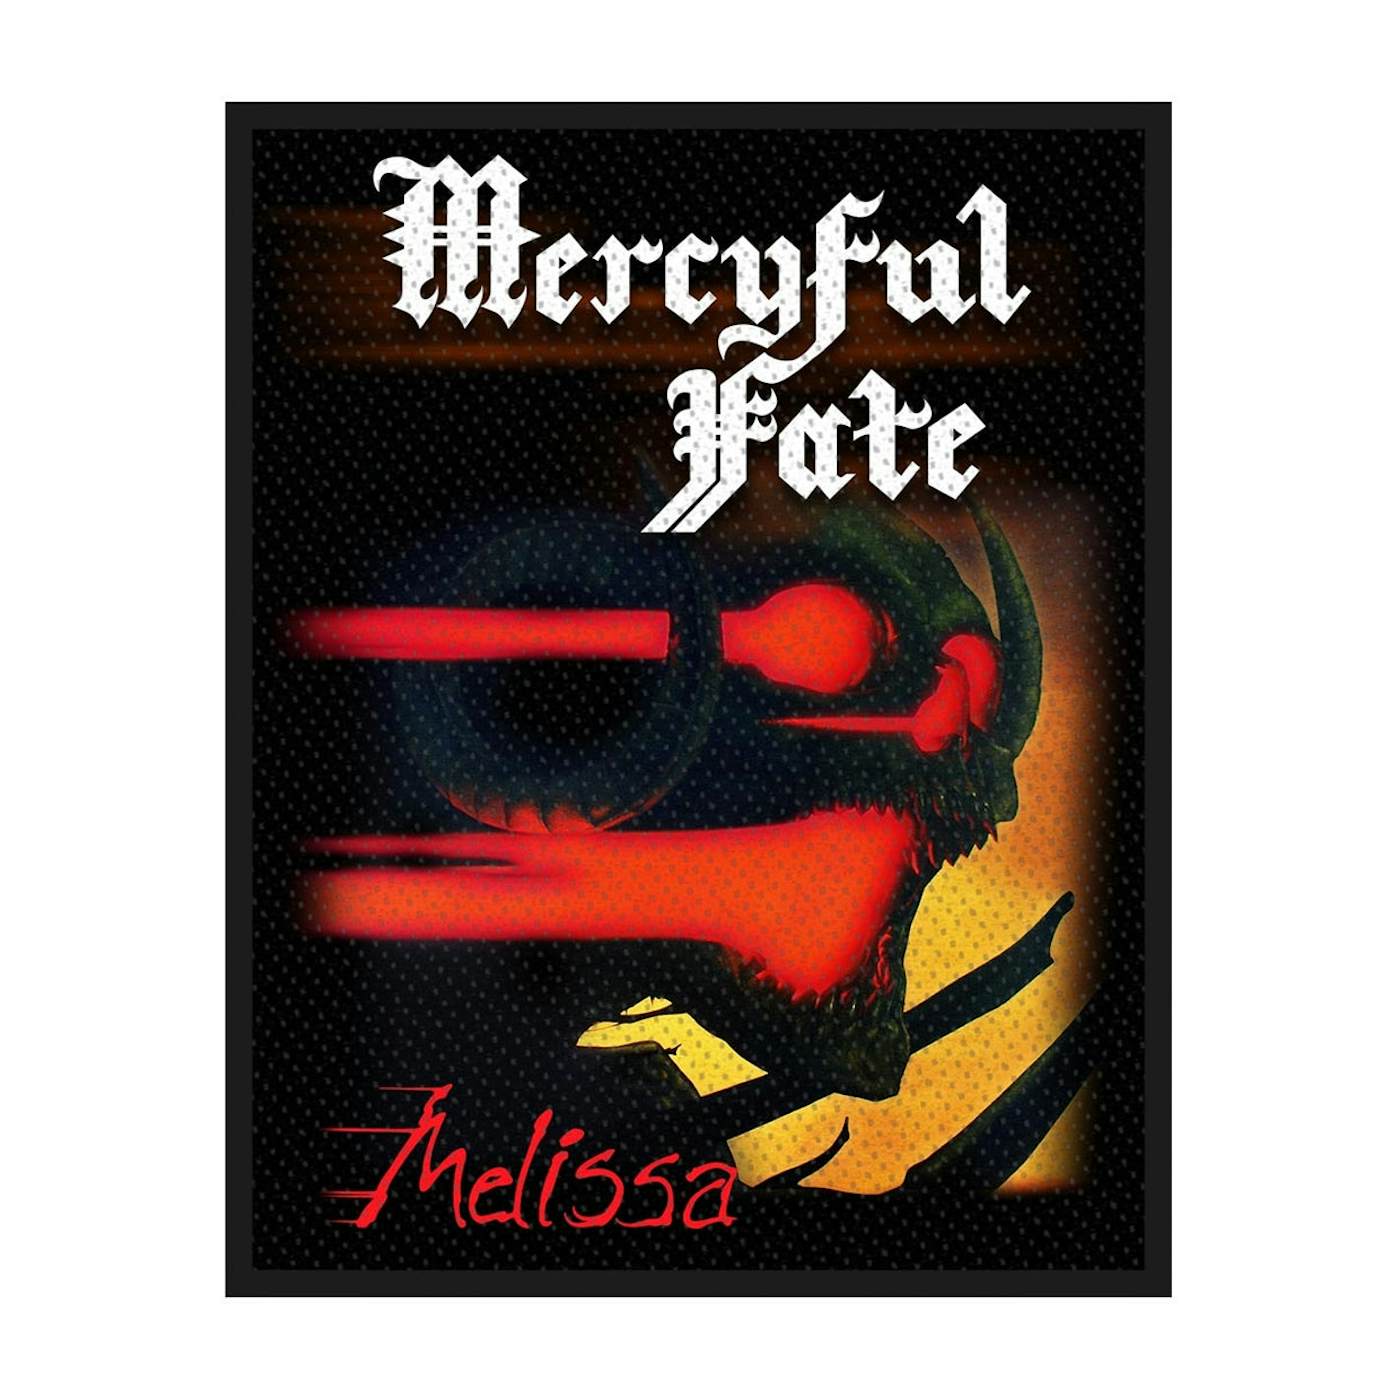 Mercyful Fate Sew-On Patch - Melissa (Packaged)